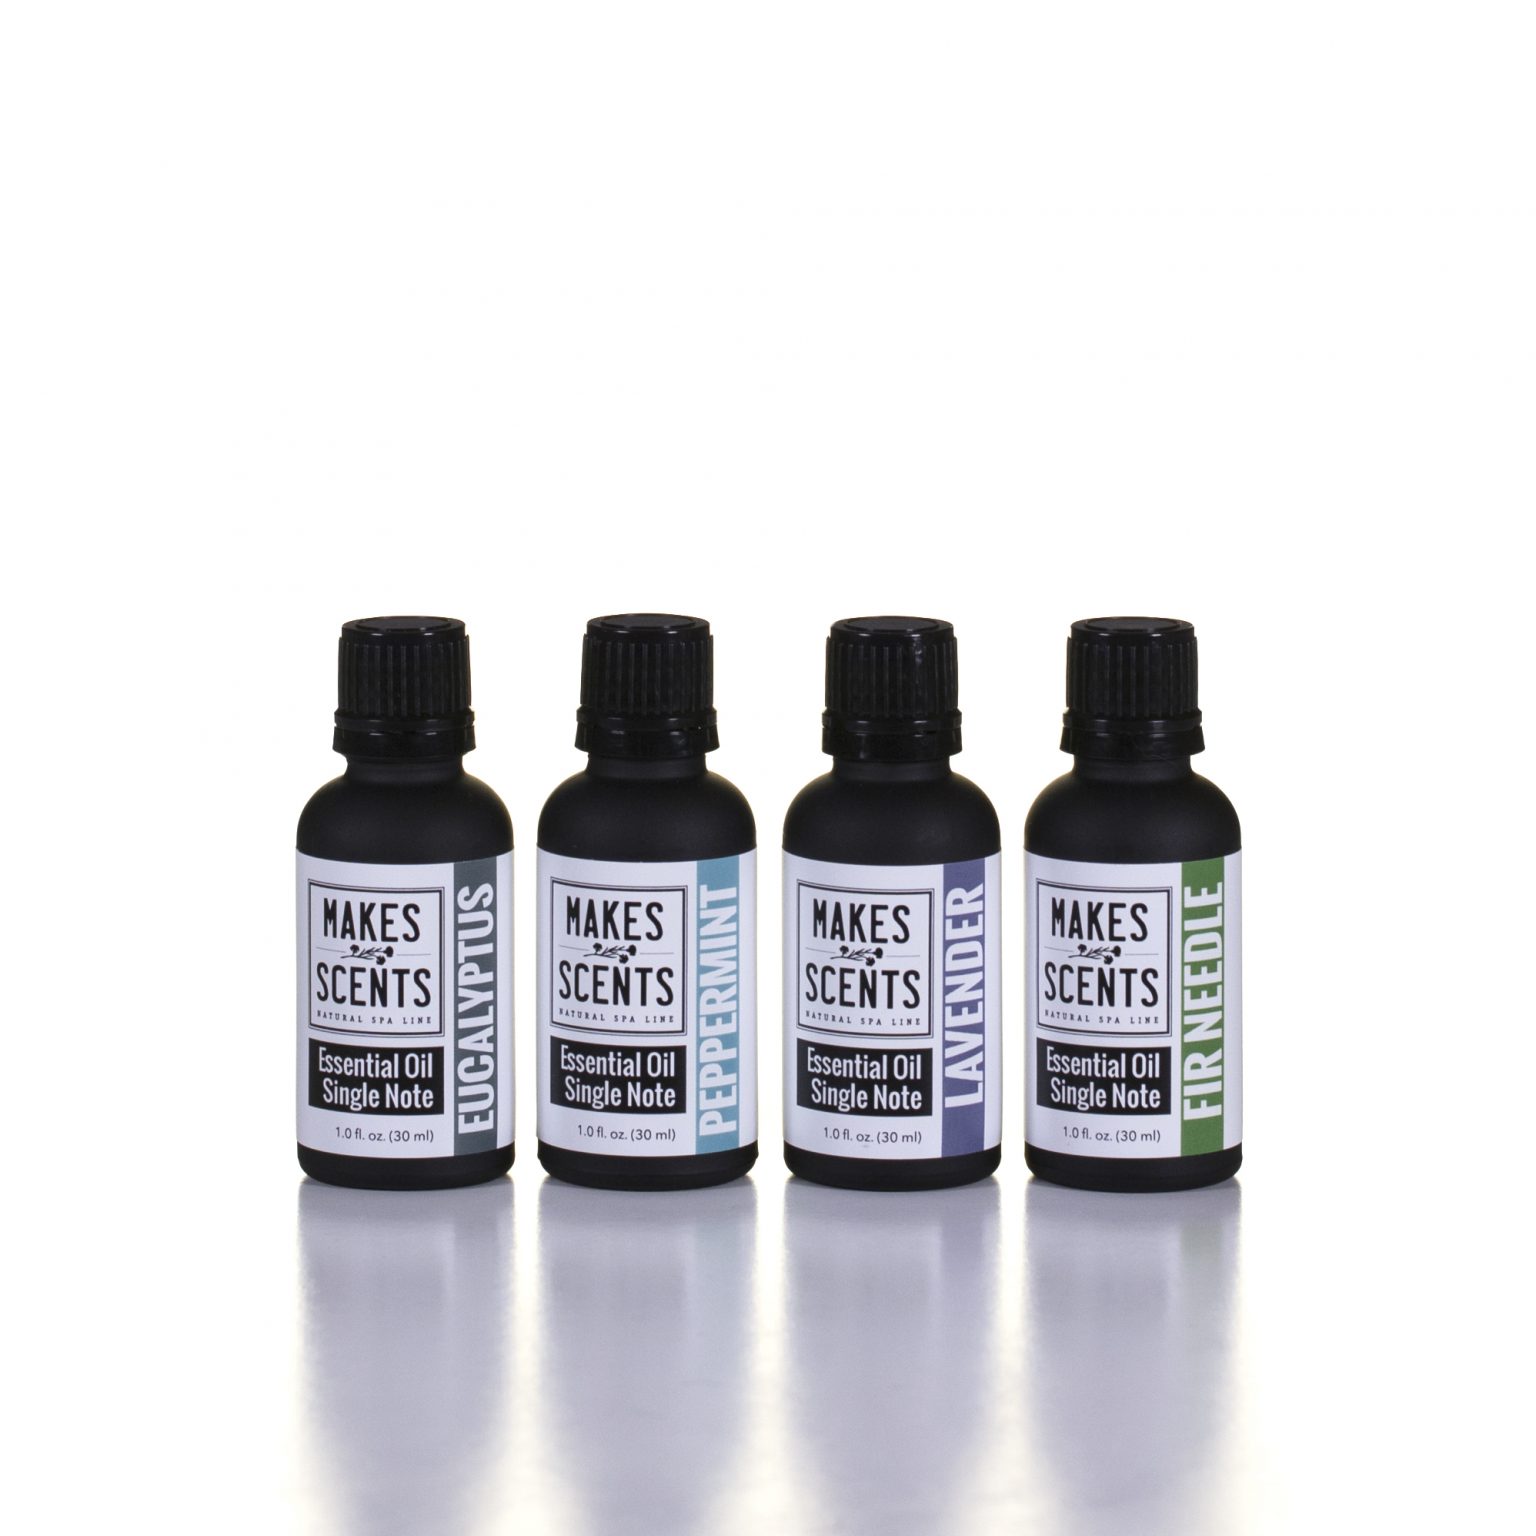 Fir Needle Essential Oil | Makes Scents Natural Spa Line